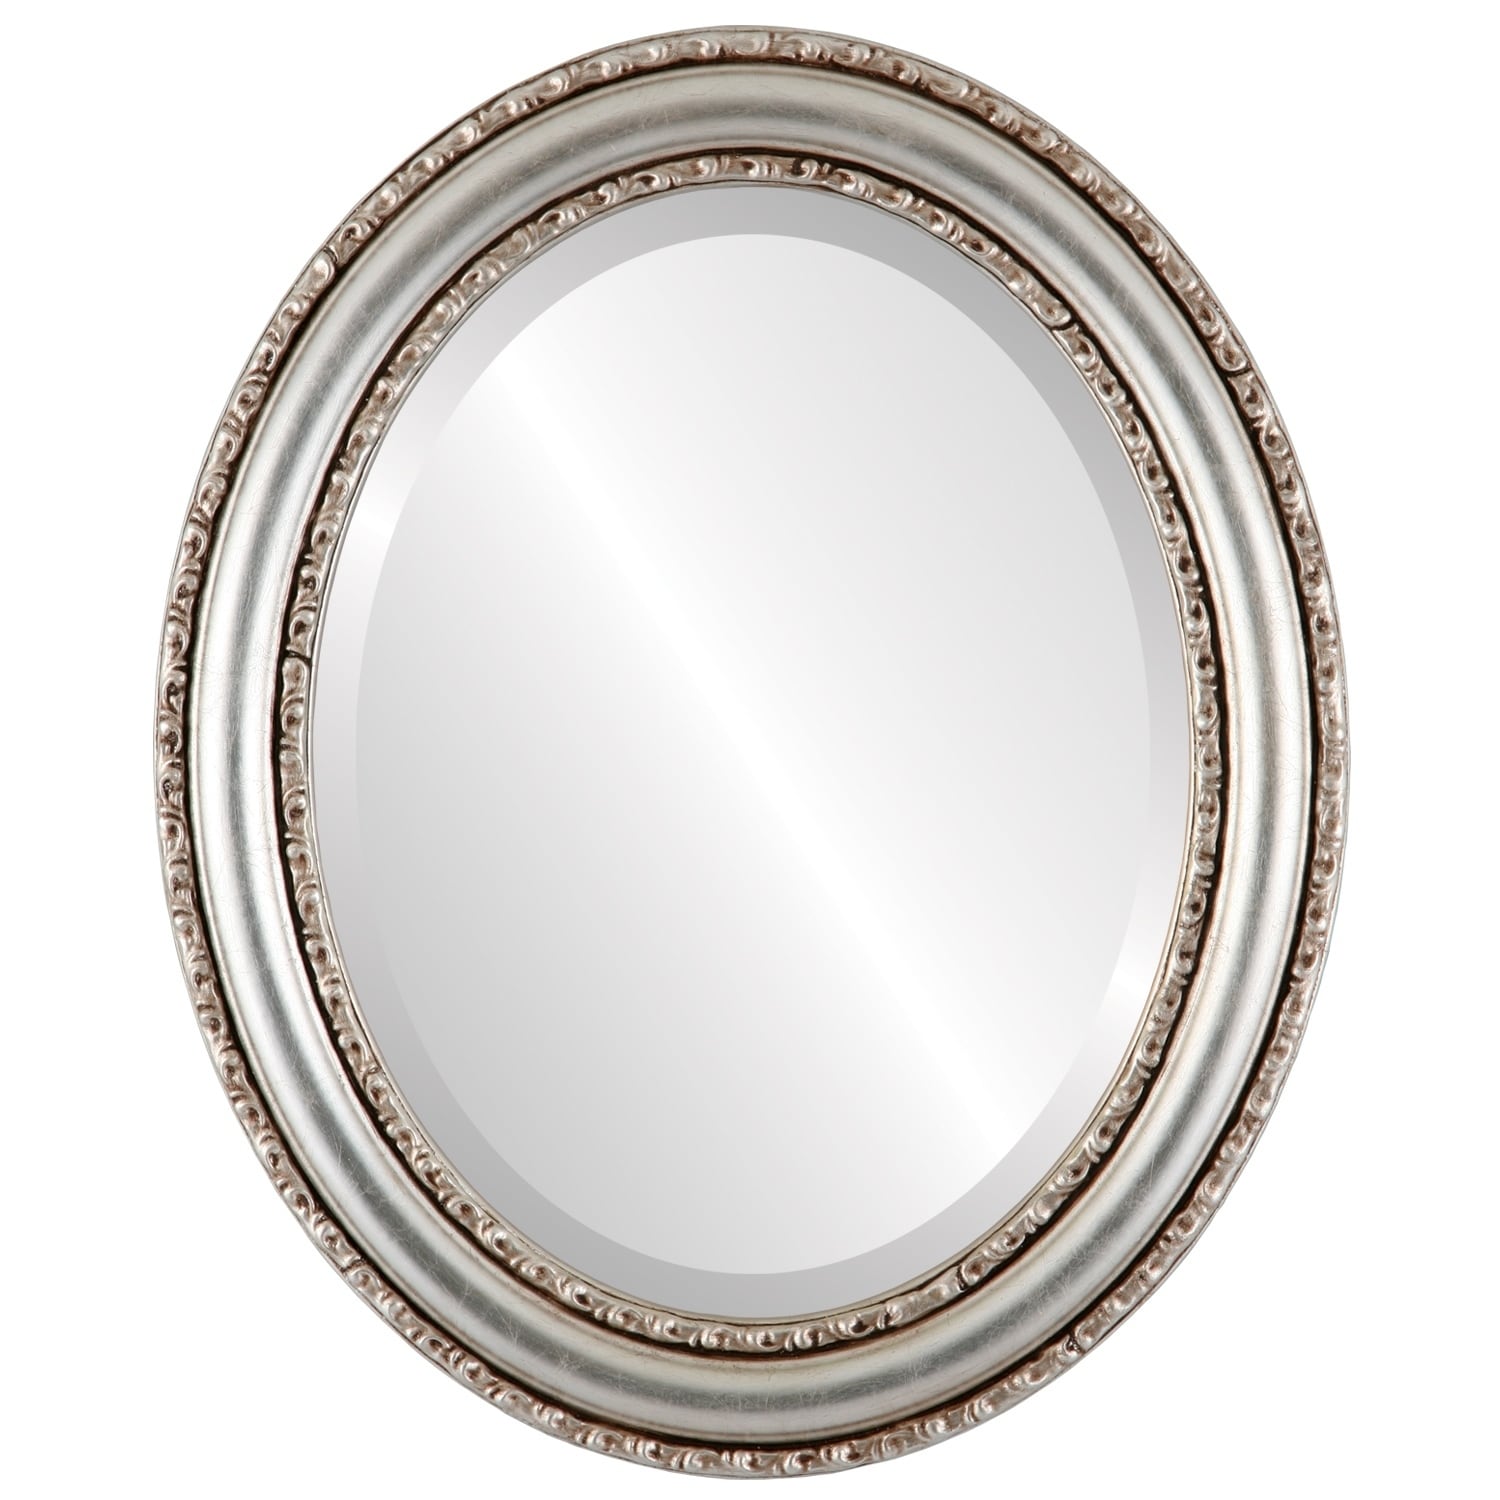 Dorset Framed Oval Mirror in Silver Leaf with Brown Antique